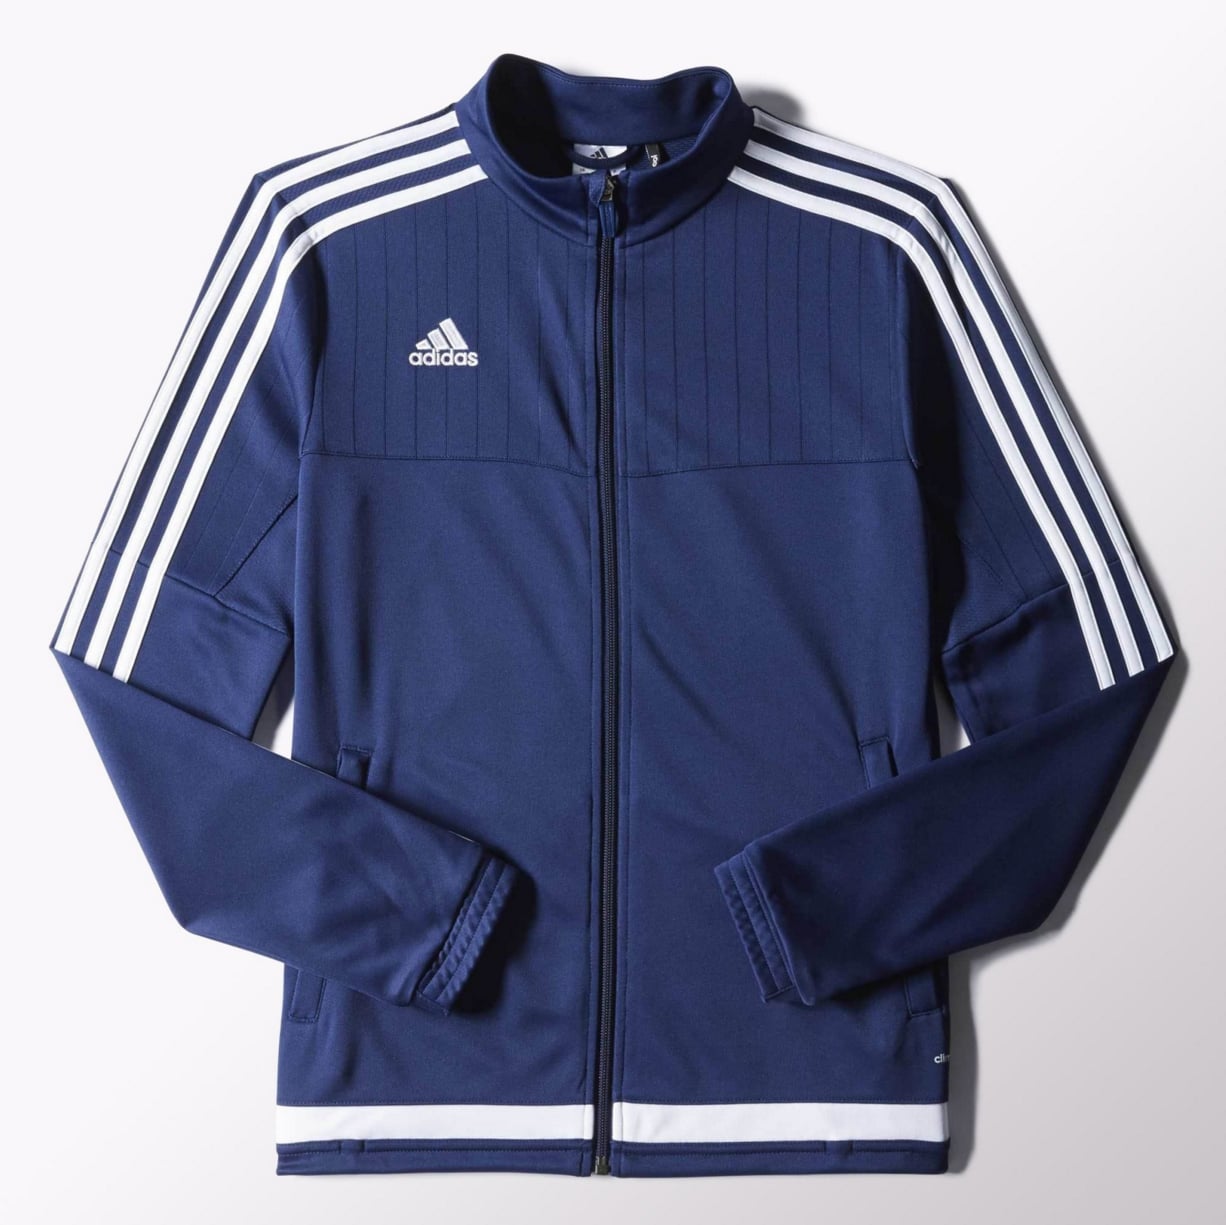 what color is the adidas jacket